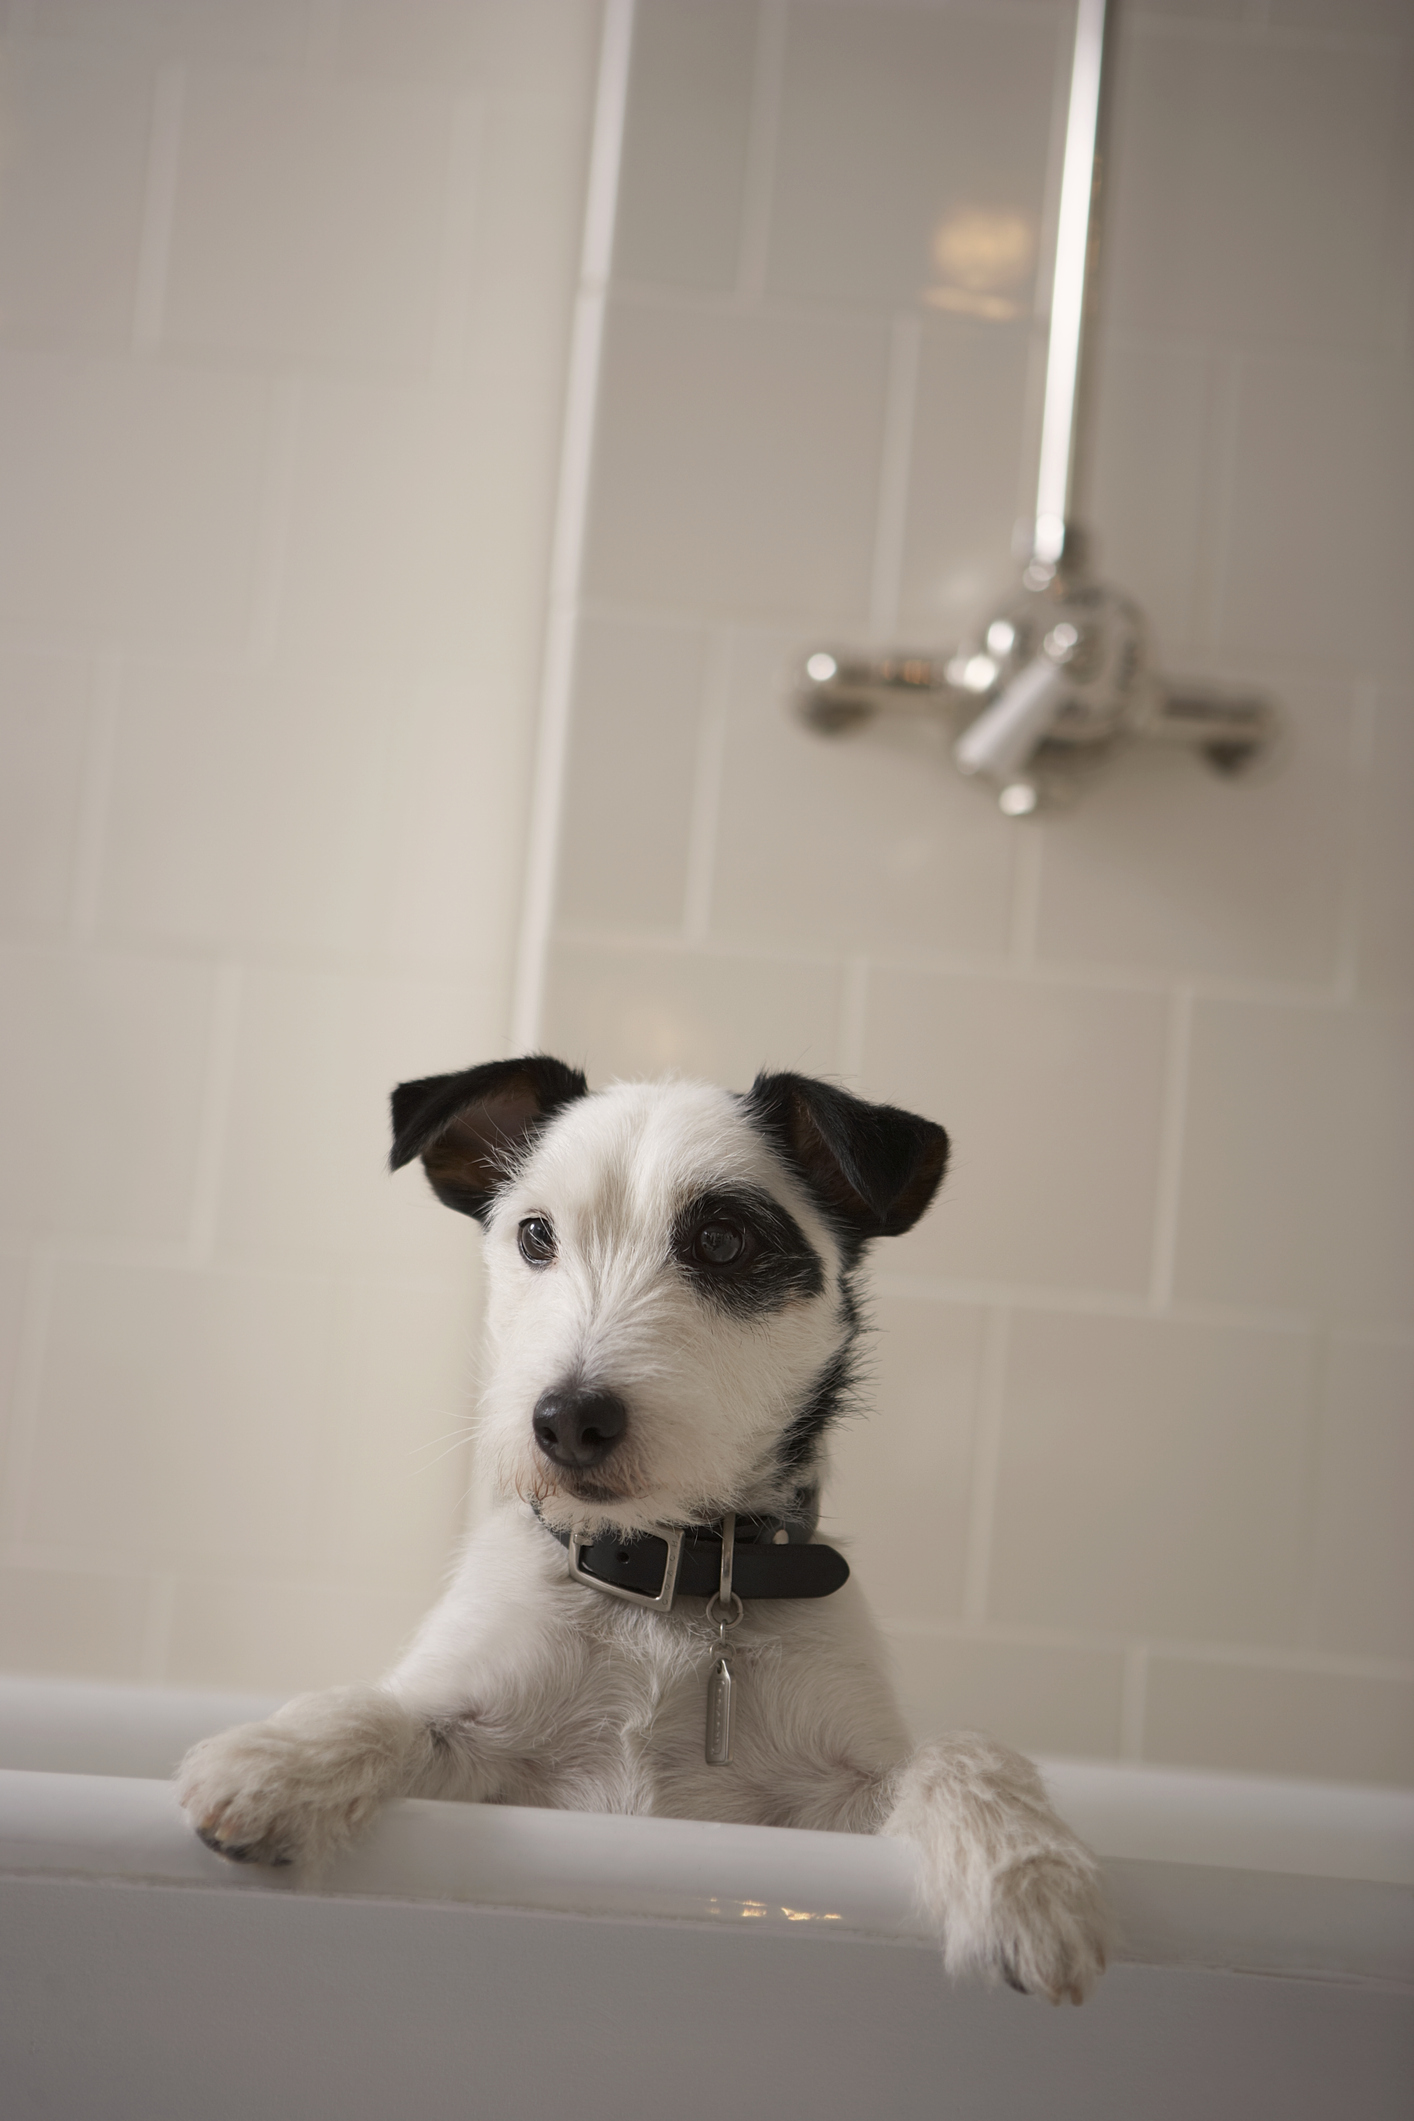 black-and-white-terrier-dog-in-bath-resting-paws-on-sidejpg